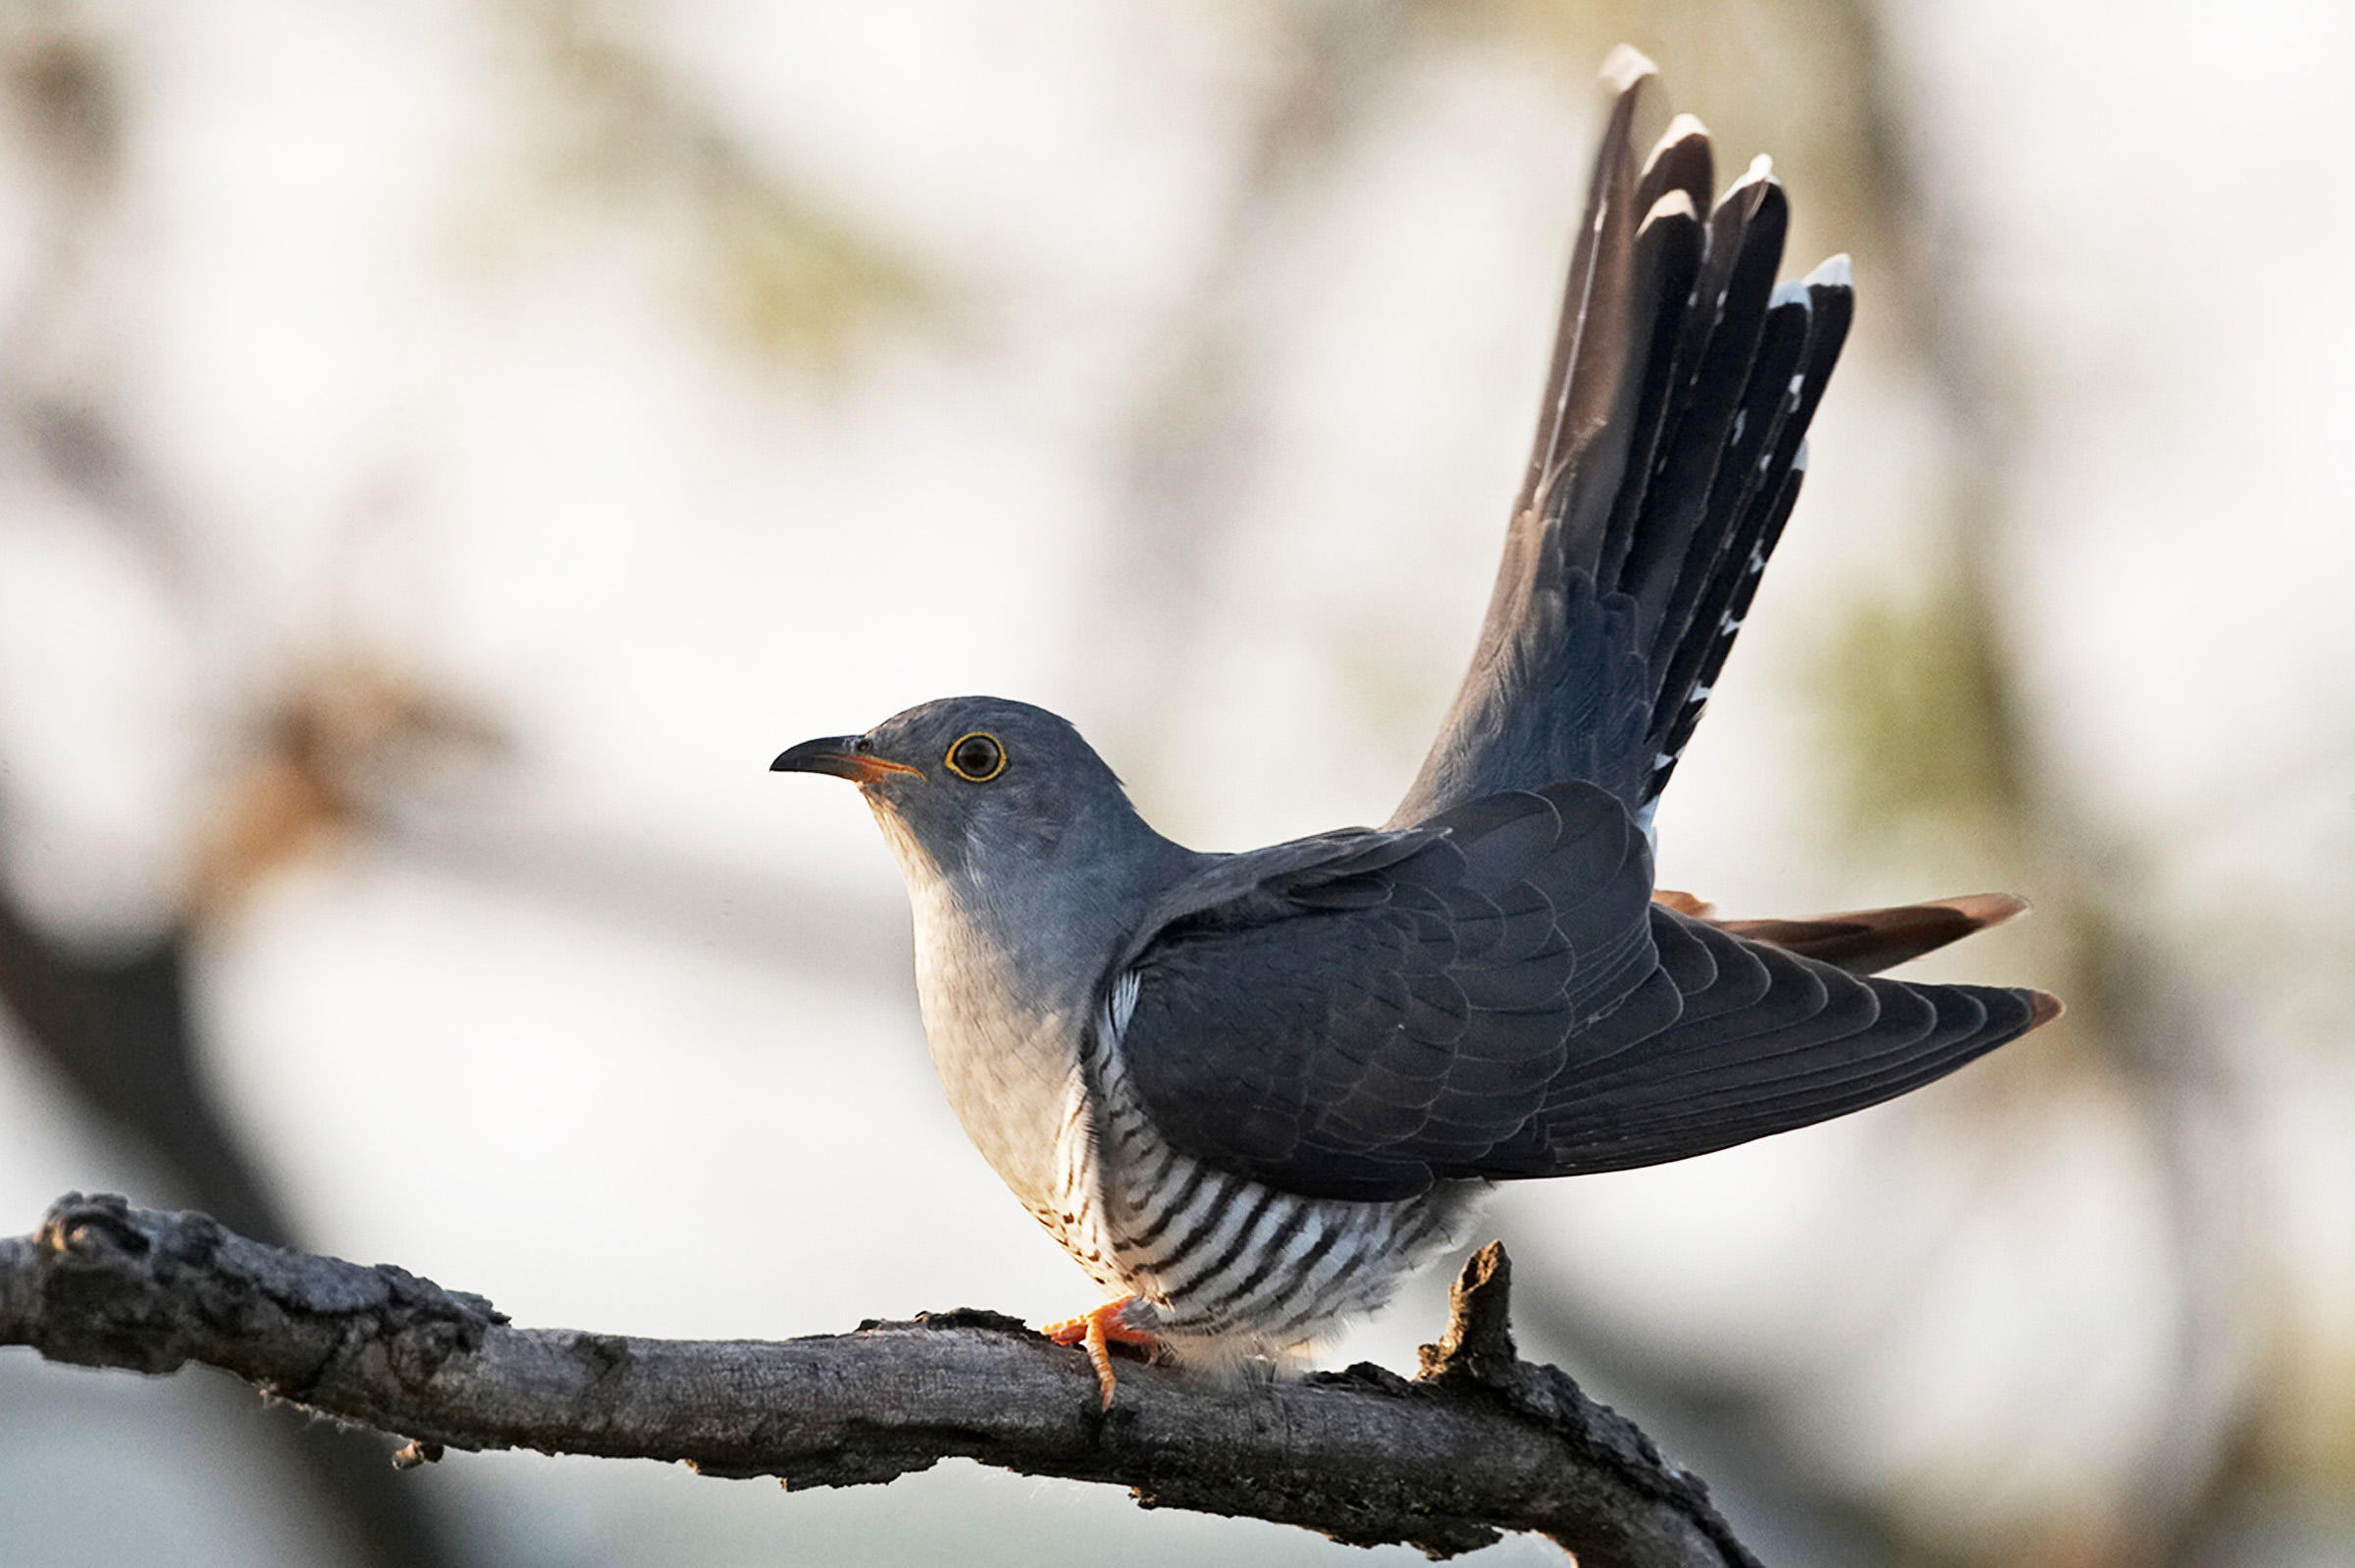 Cuckoo wallpapers, Timeless beauty, Feathered delight, Captivating avian, 2400x1600 HD Desktop